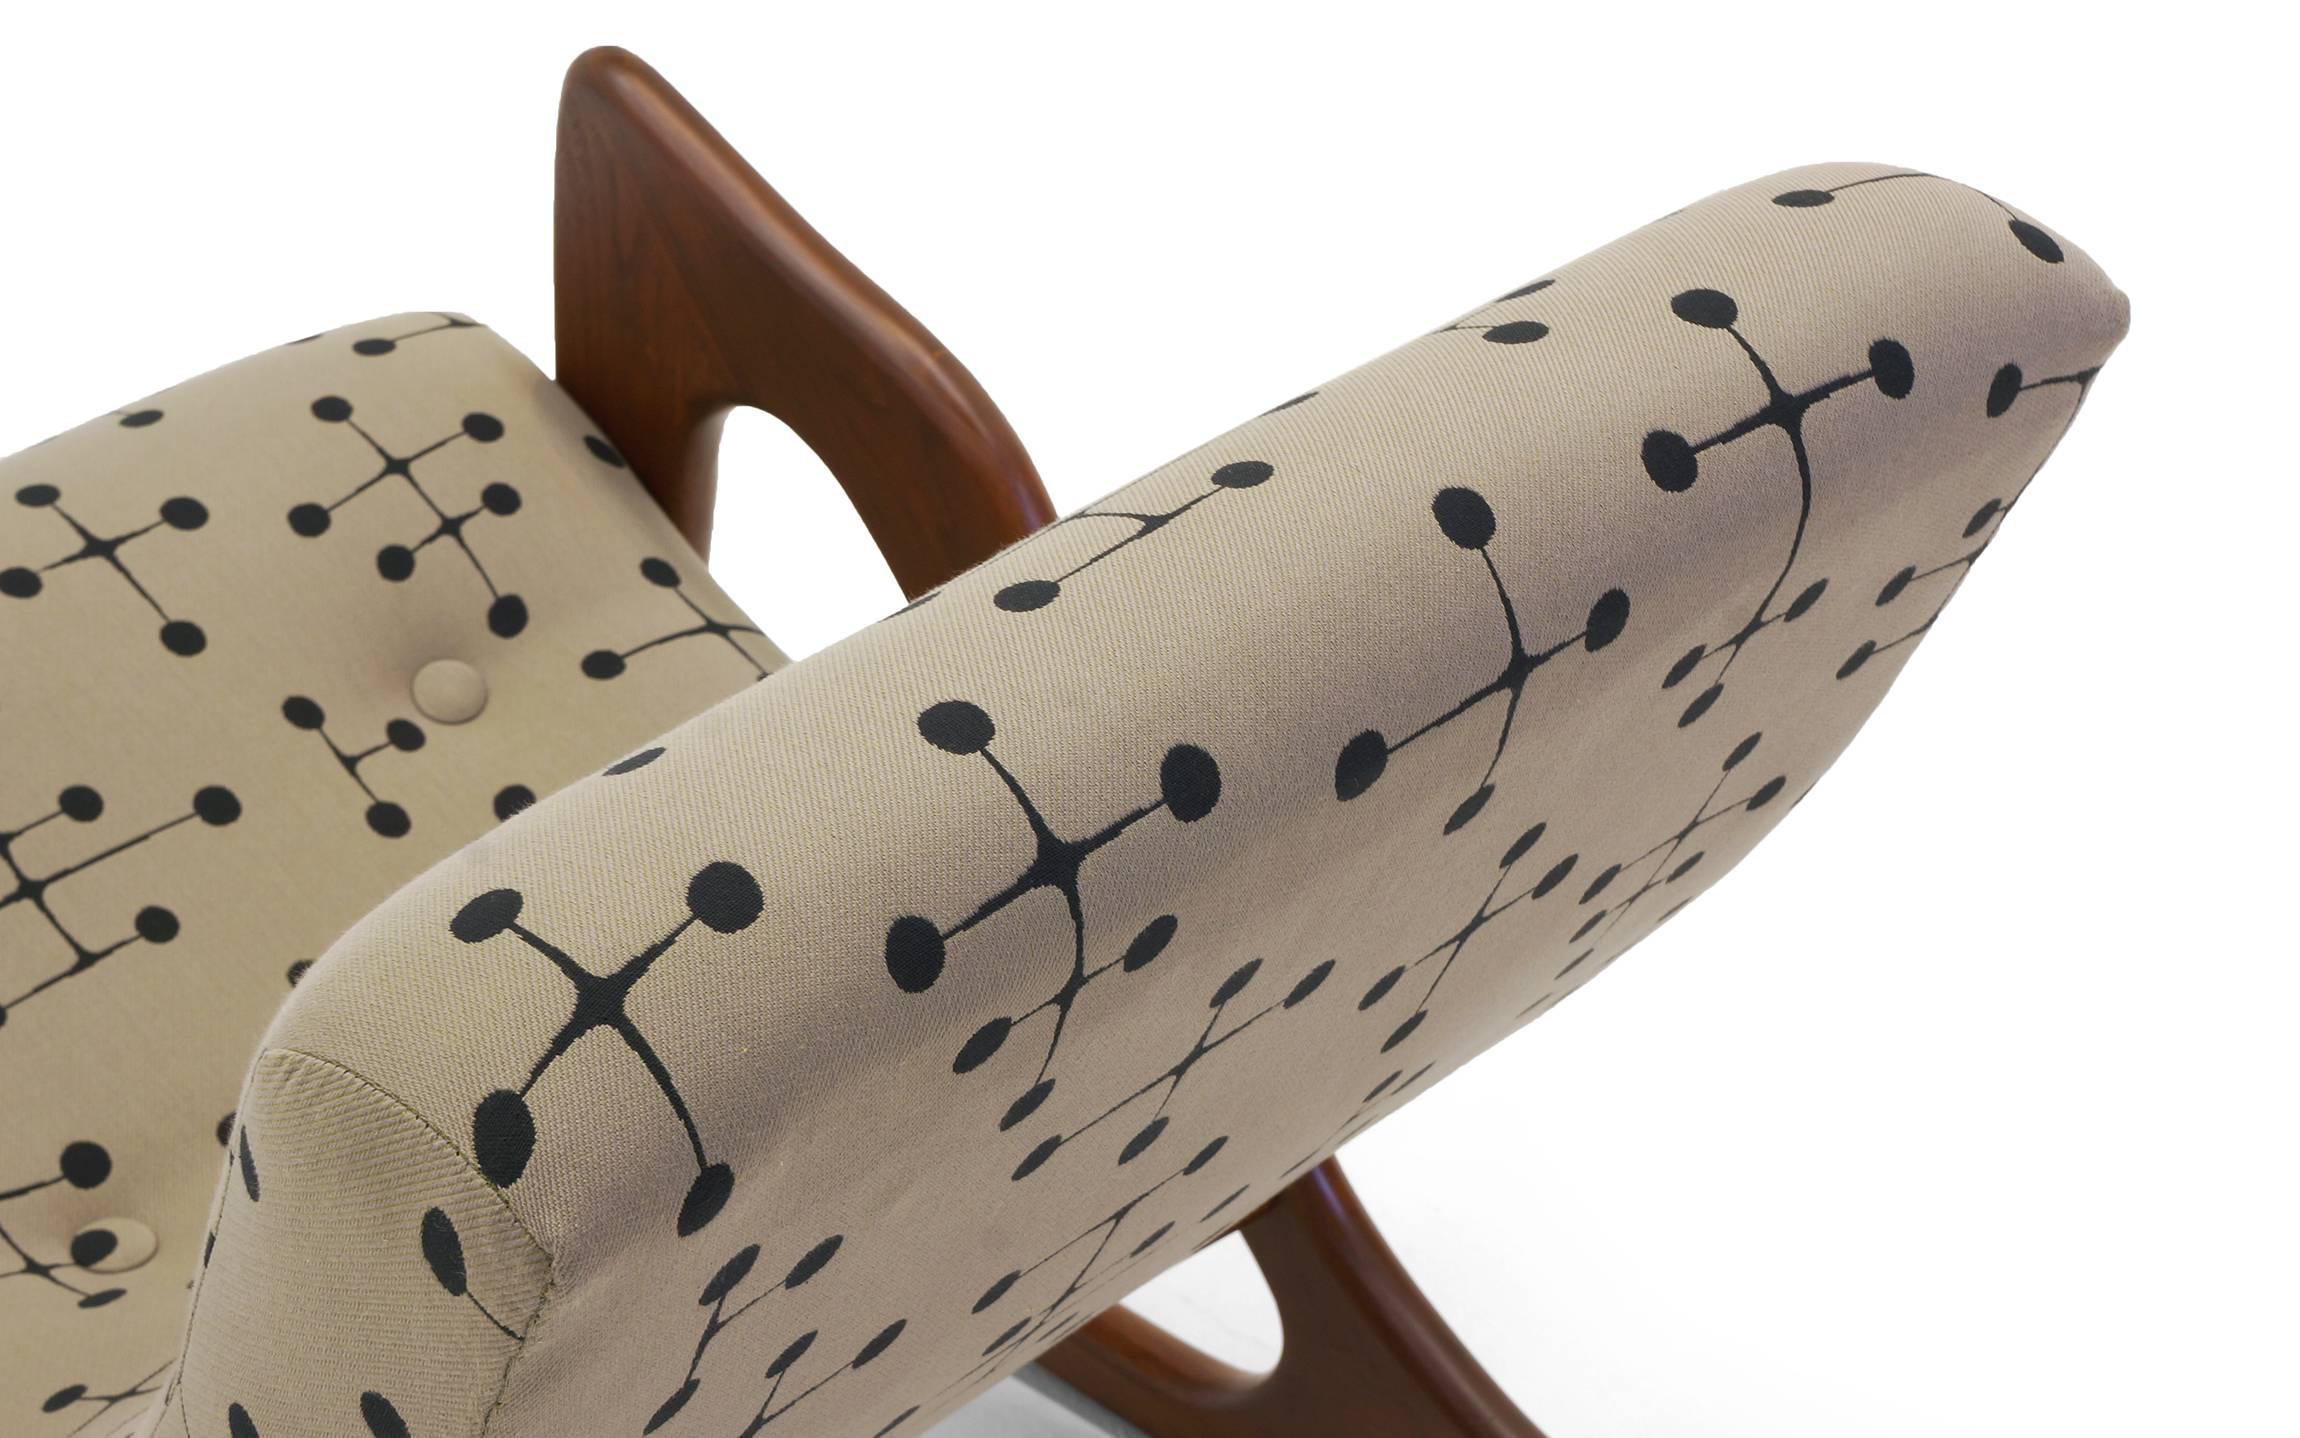 Upholstery Adrian Pearsall Rocking Chair, Restored Including Eames Dot Fabric by Maharam